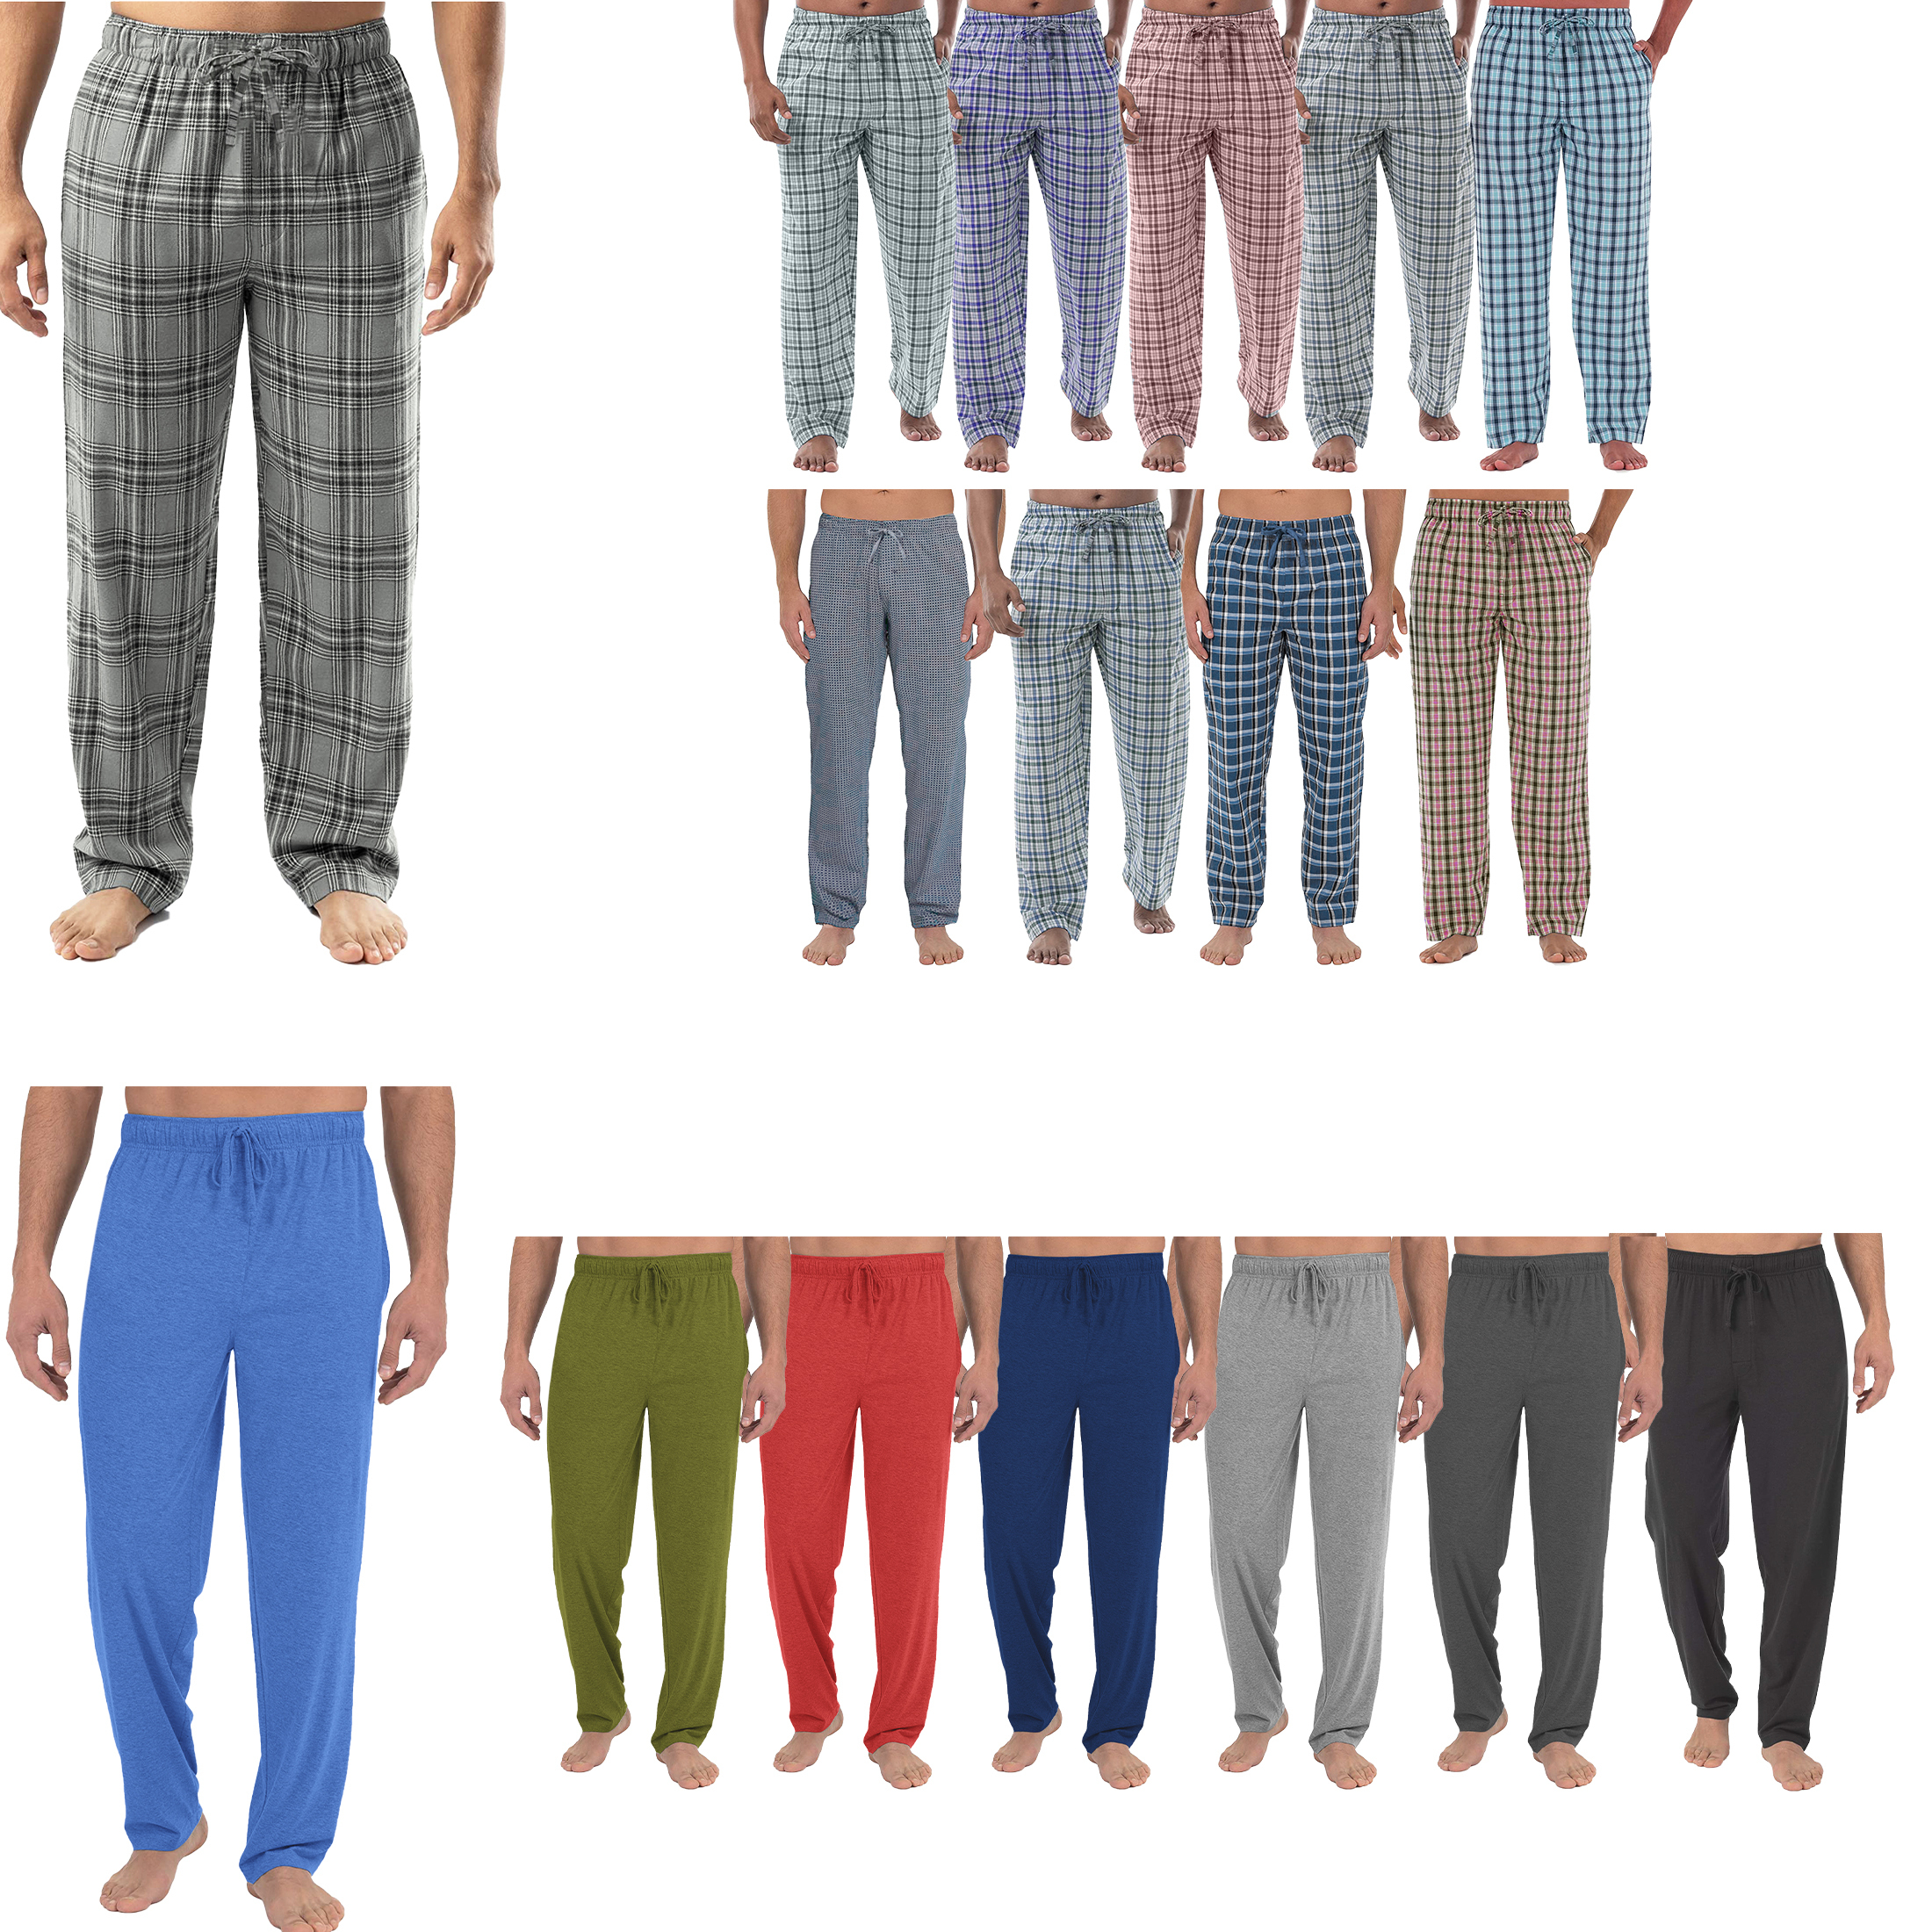 Men's Soft Jersey Knit Long Lounge Sleep Pants With Pockets - Plaid, Large